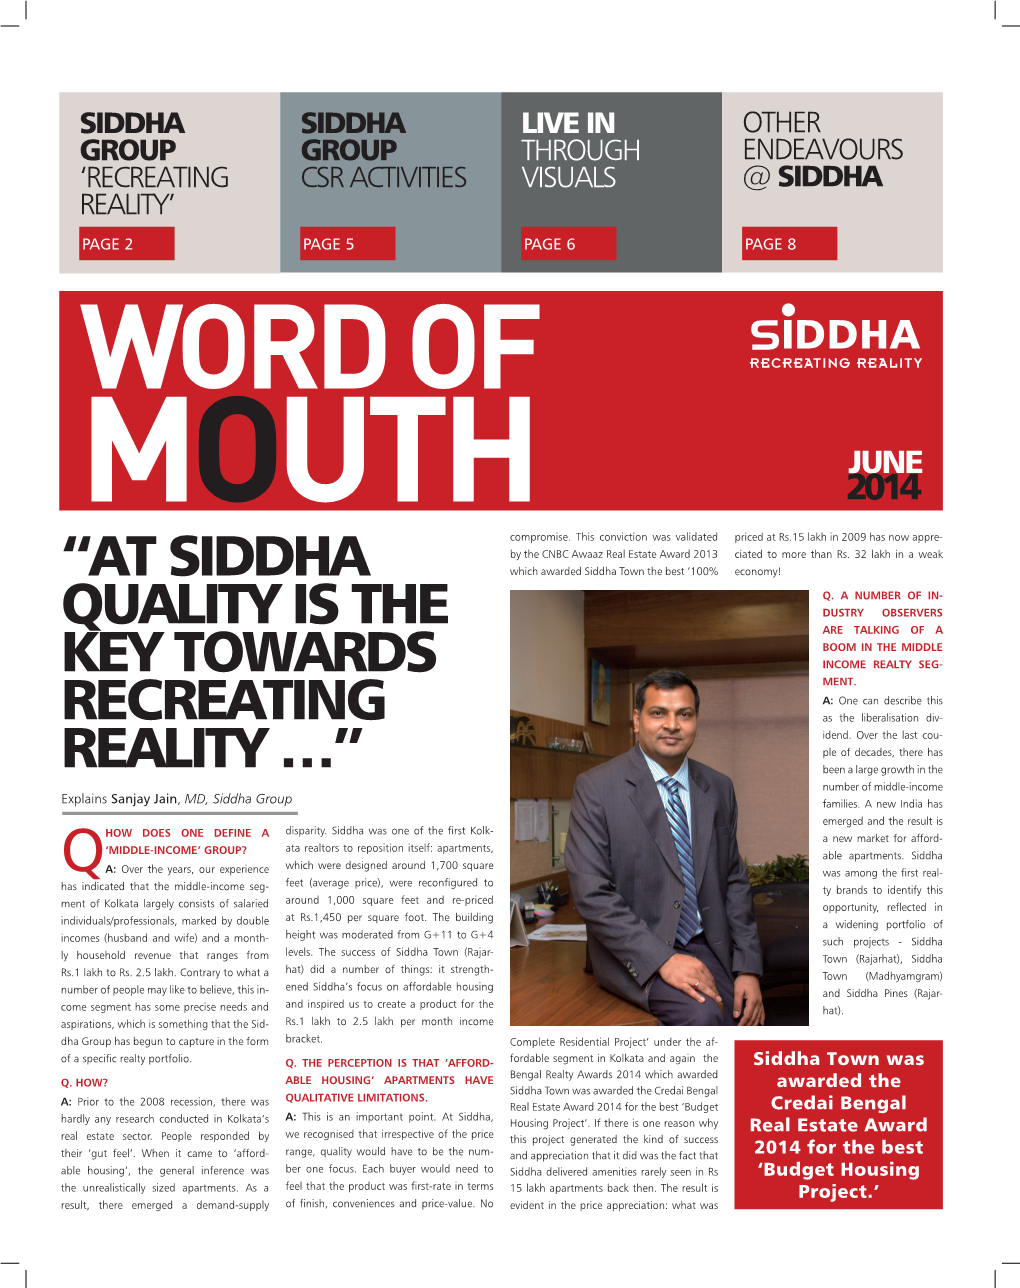 “At SIDDHA Quality IS the Key Towards Recreating Reality …”